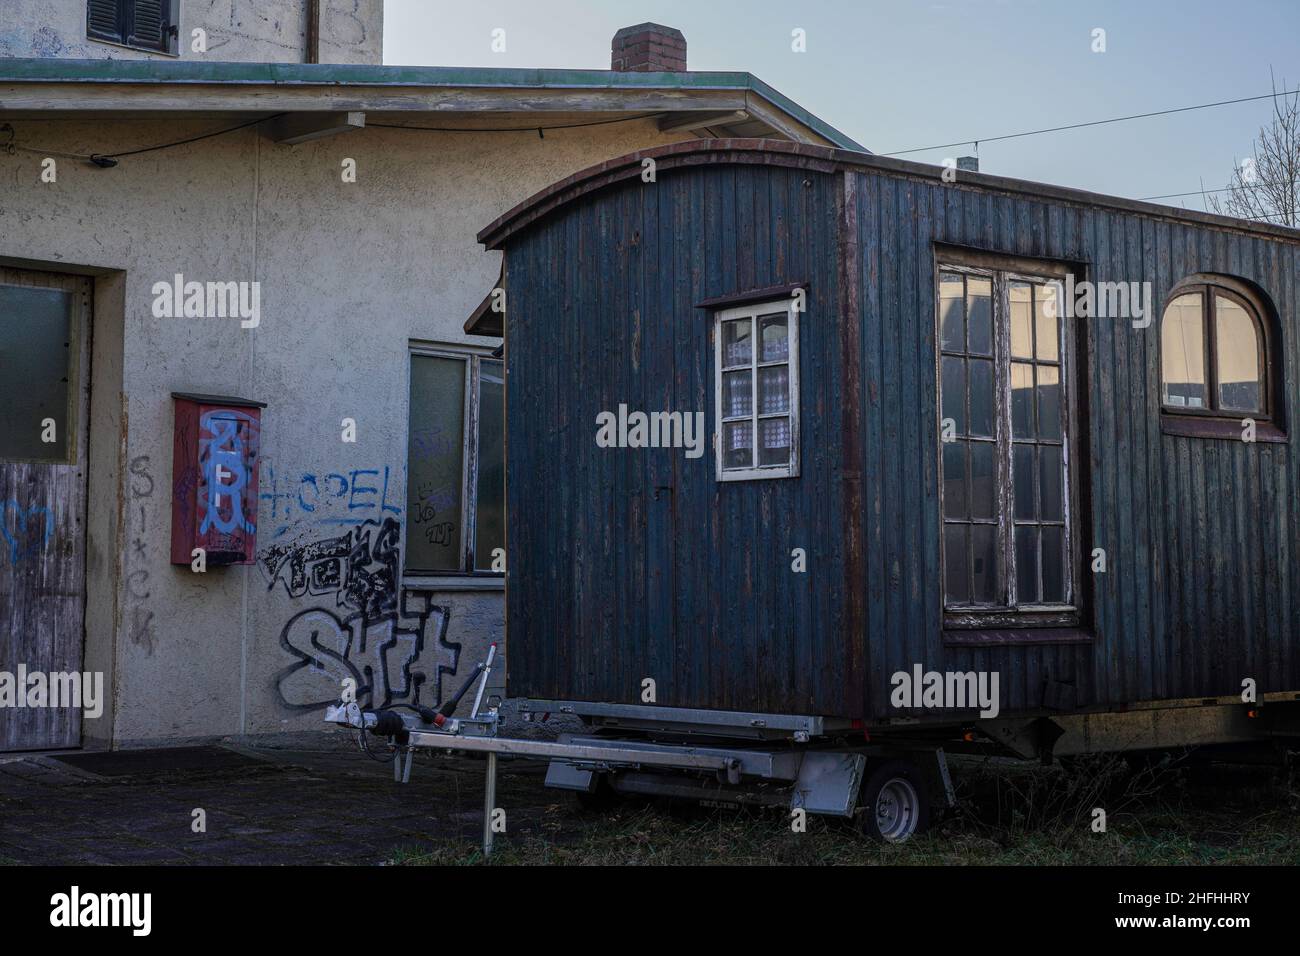 An old wooden caravan trailer with three windows, one of them large, is parked in front of an uninhabited house. Stock Photo